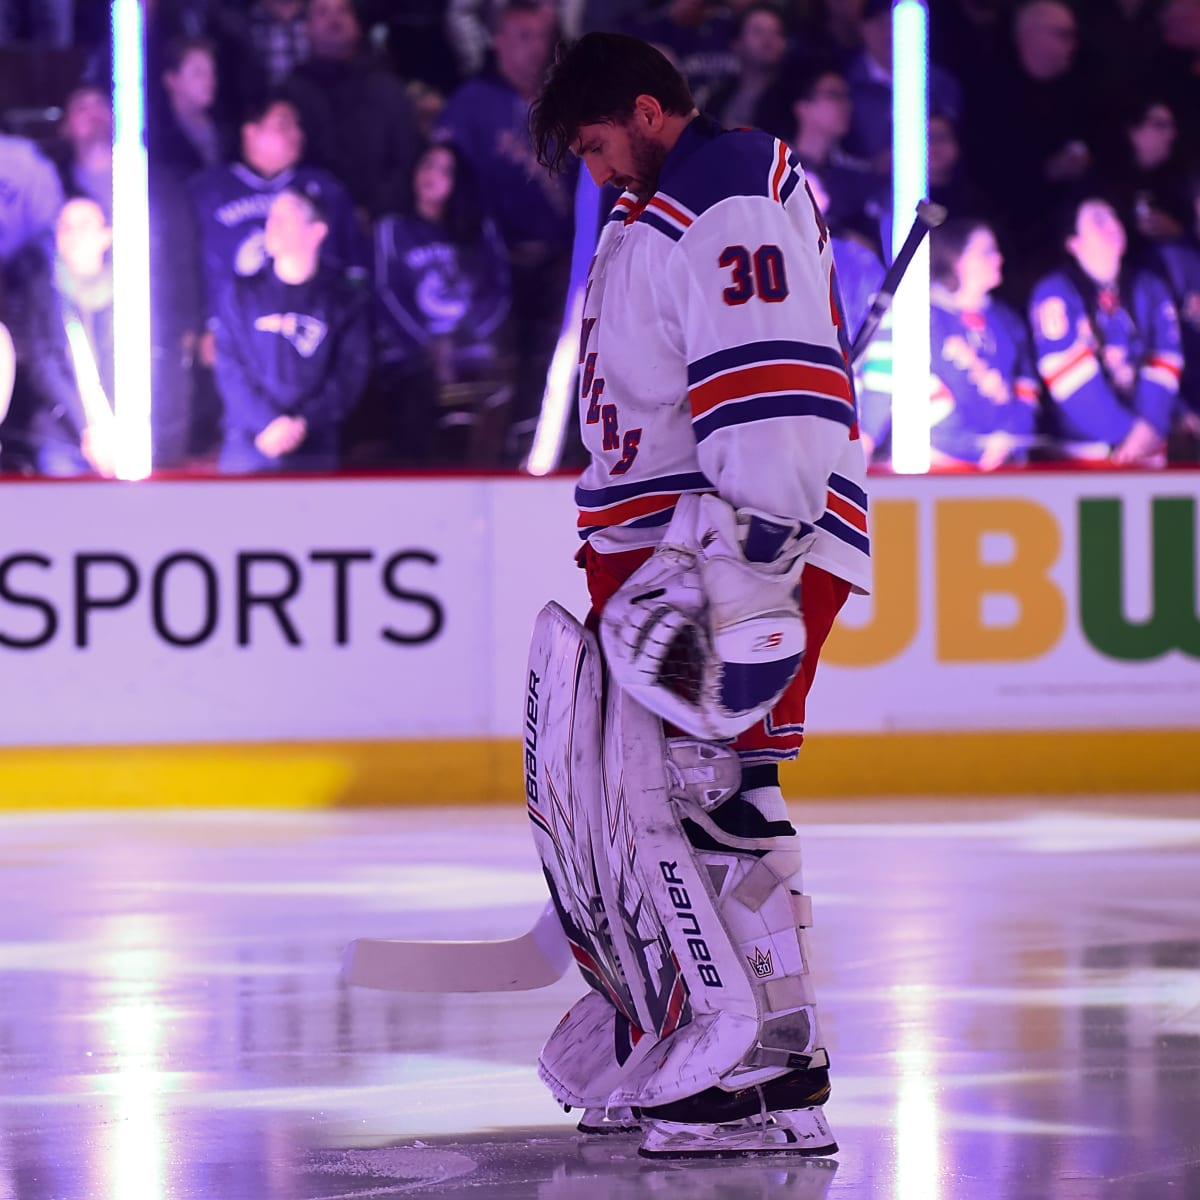 A first look at Henrik Lundqvist in a Washington Capitals jersey